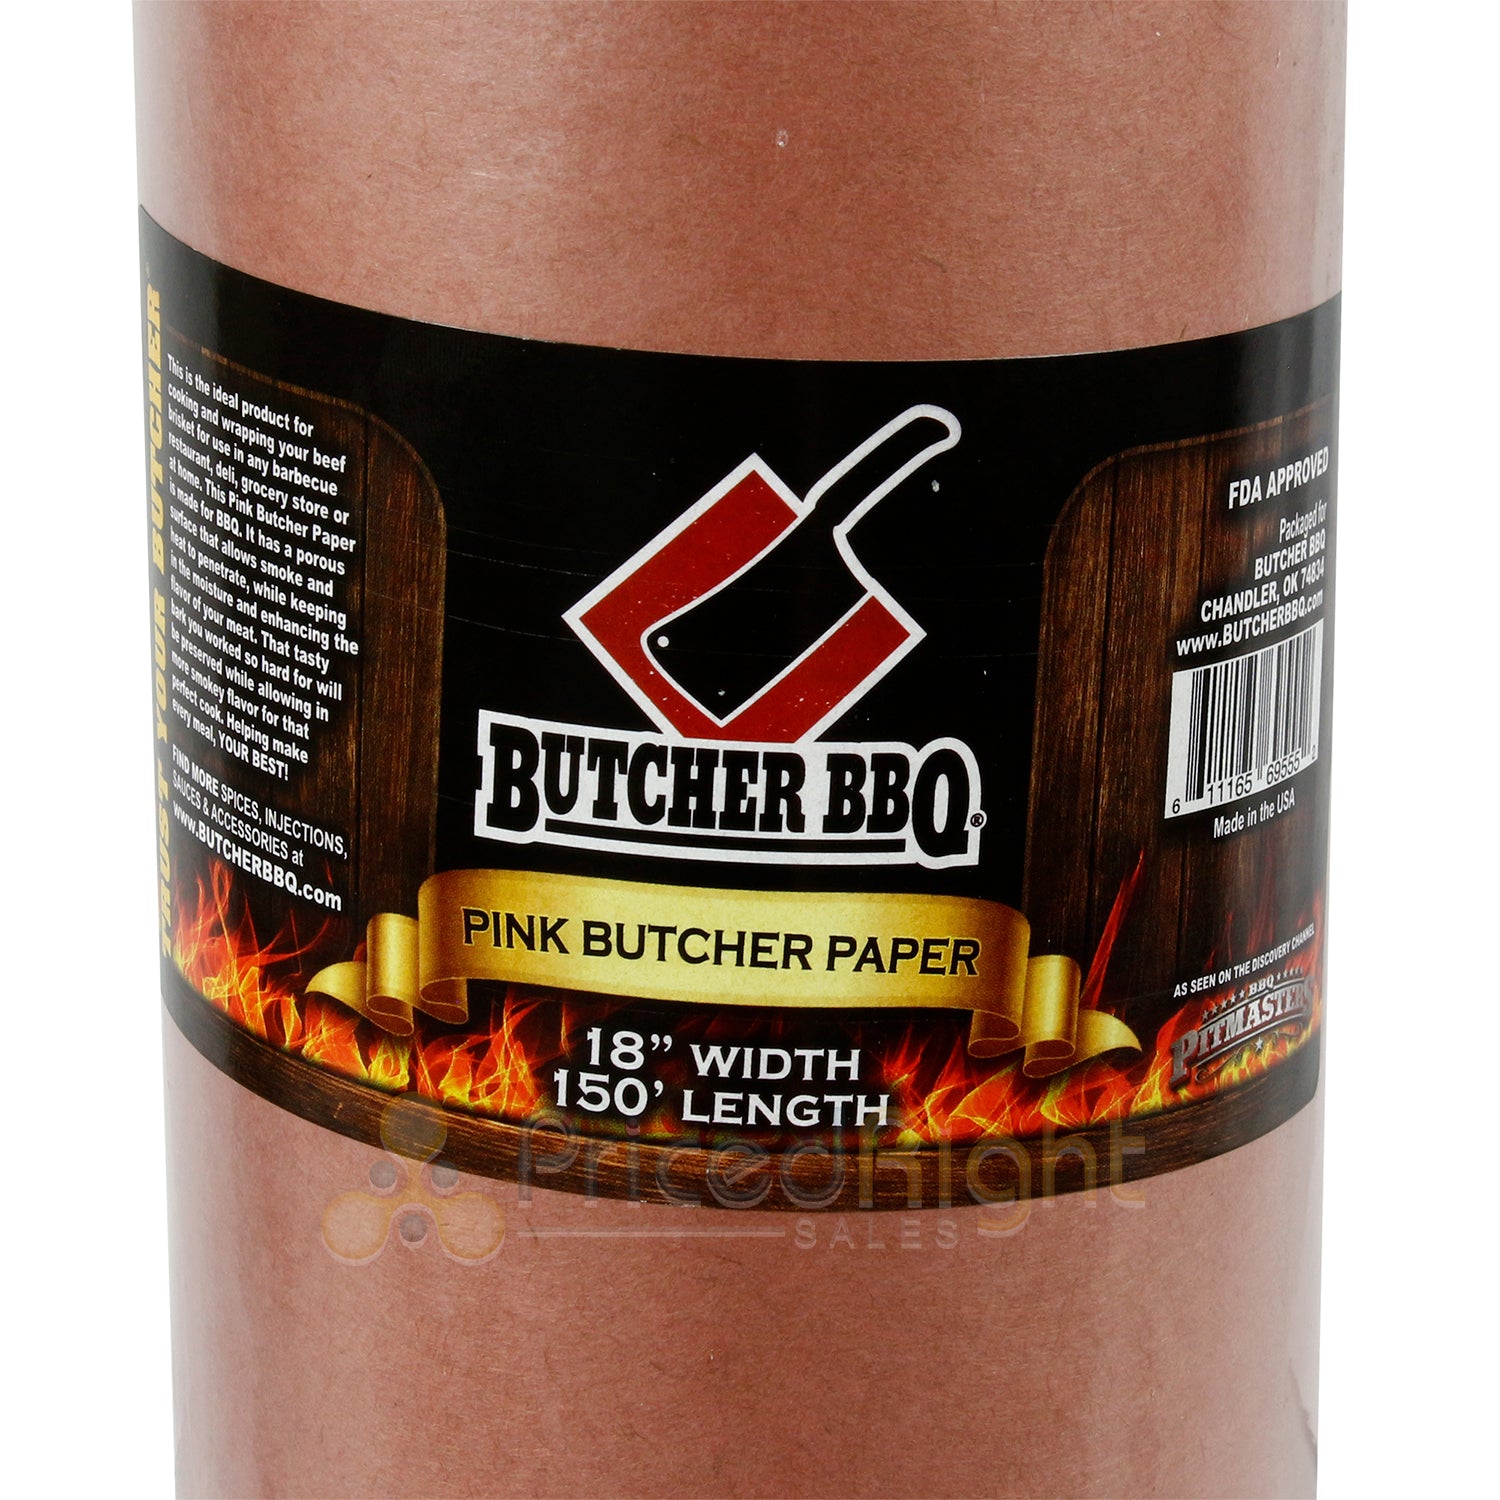 Butcher BBQ Pink Butcher Paper 18 Inches x 150 Foot Roll All-Purpose Meat Wrap